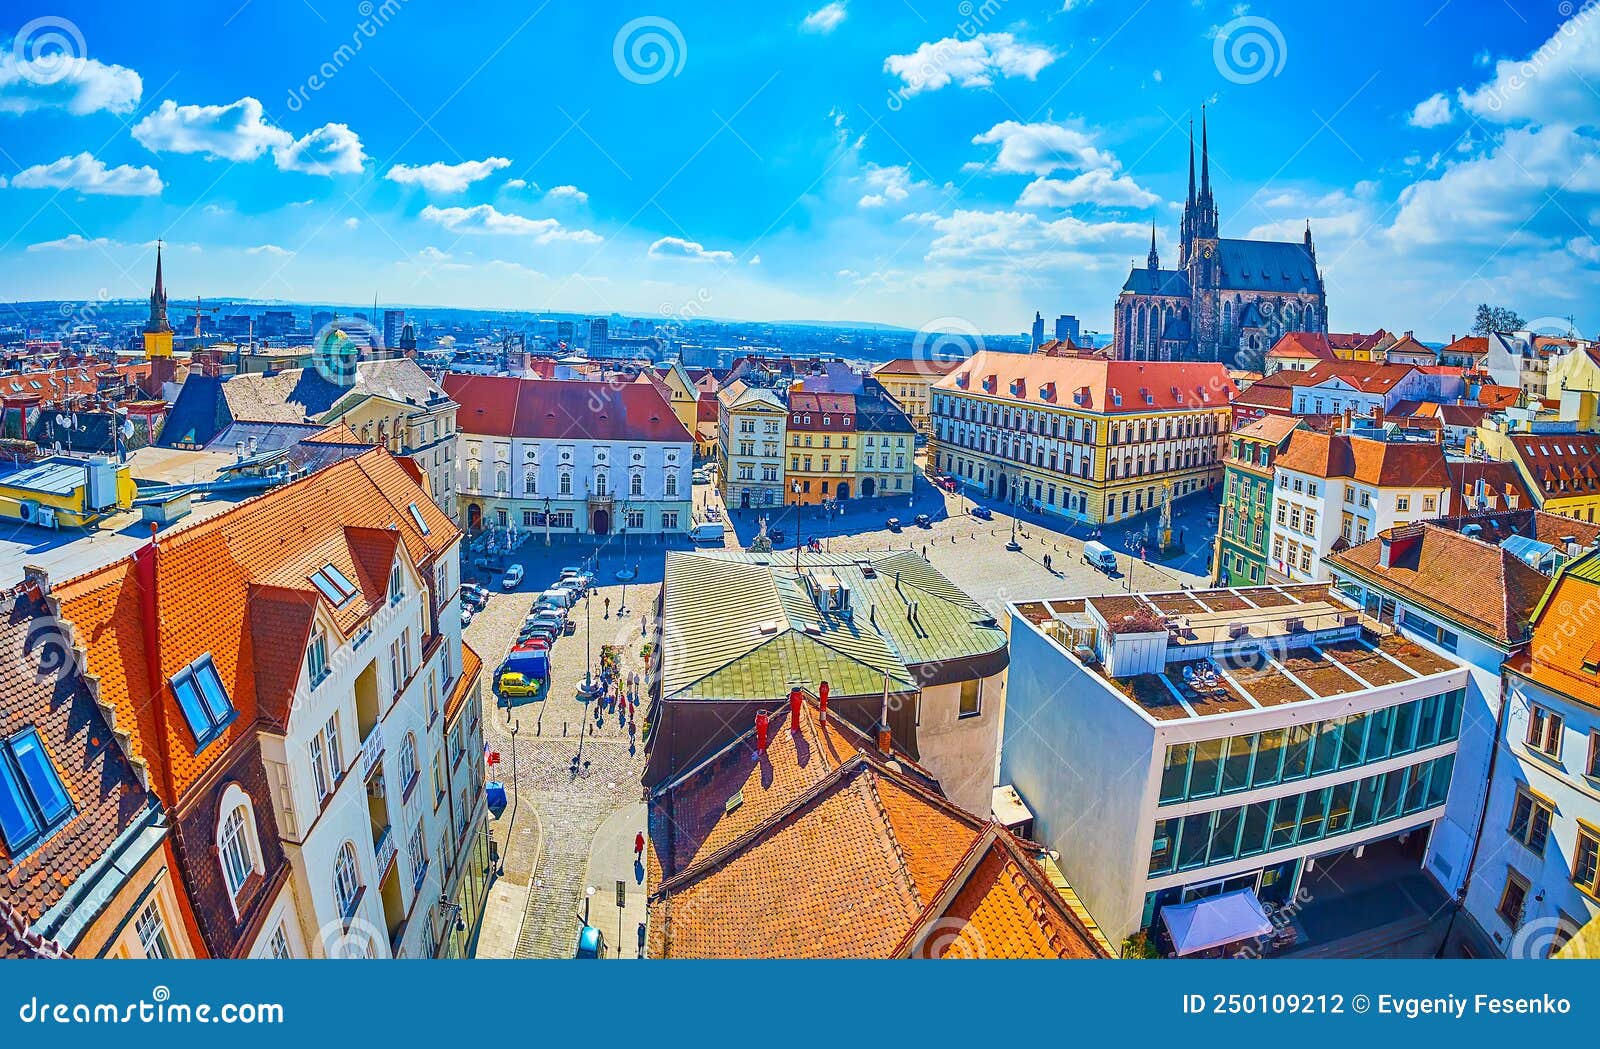 the view on old town of brno with zelny trh cabbage market square and huge cathedral of saints peter and paul, czech republic